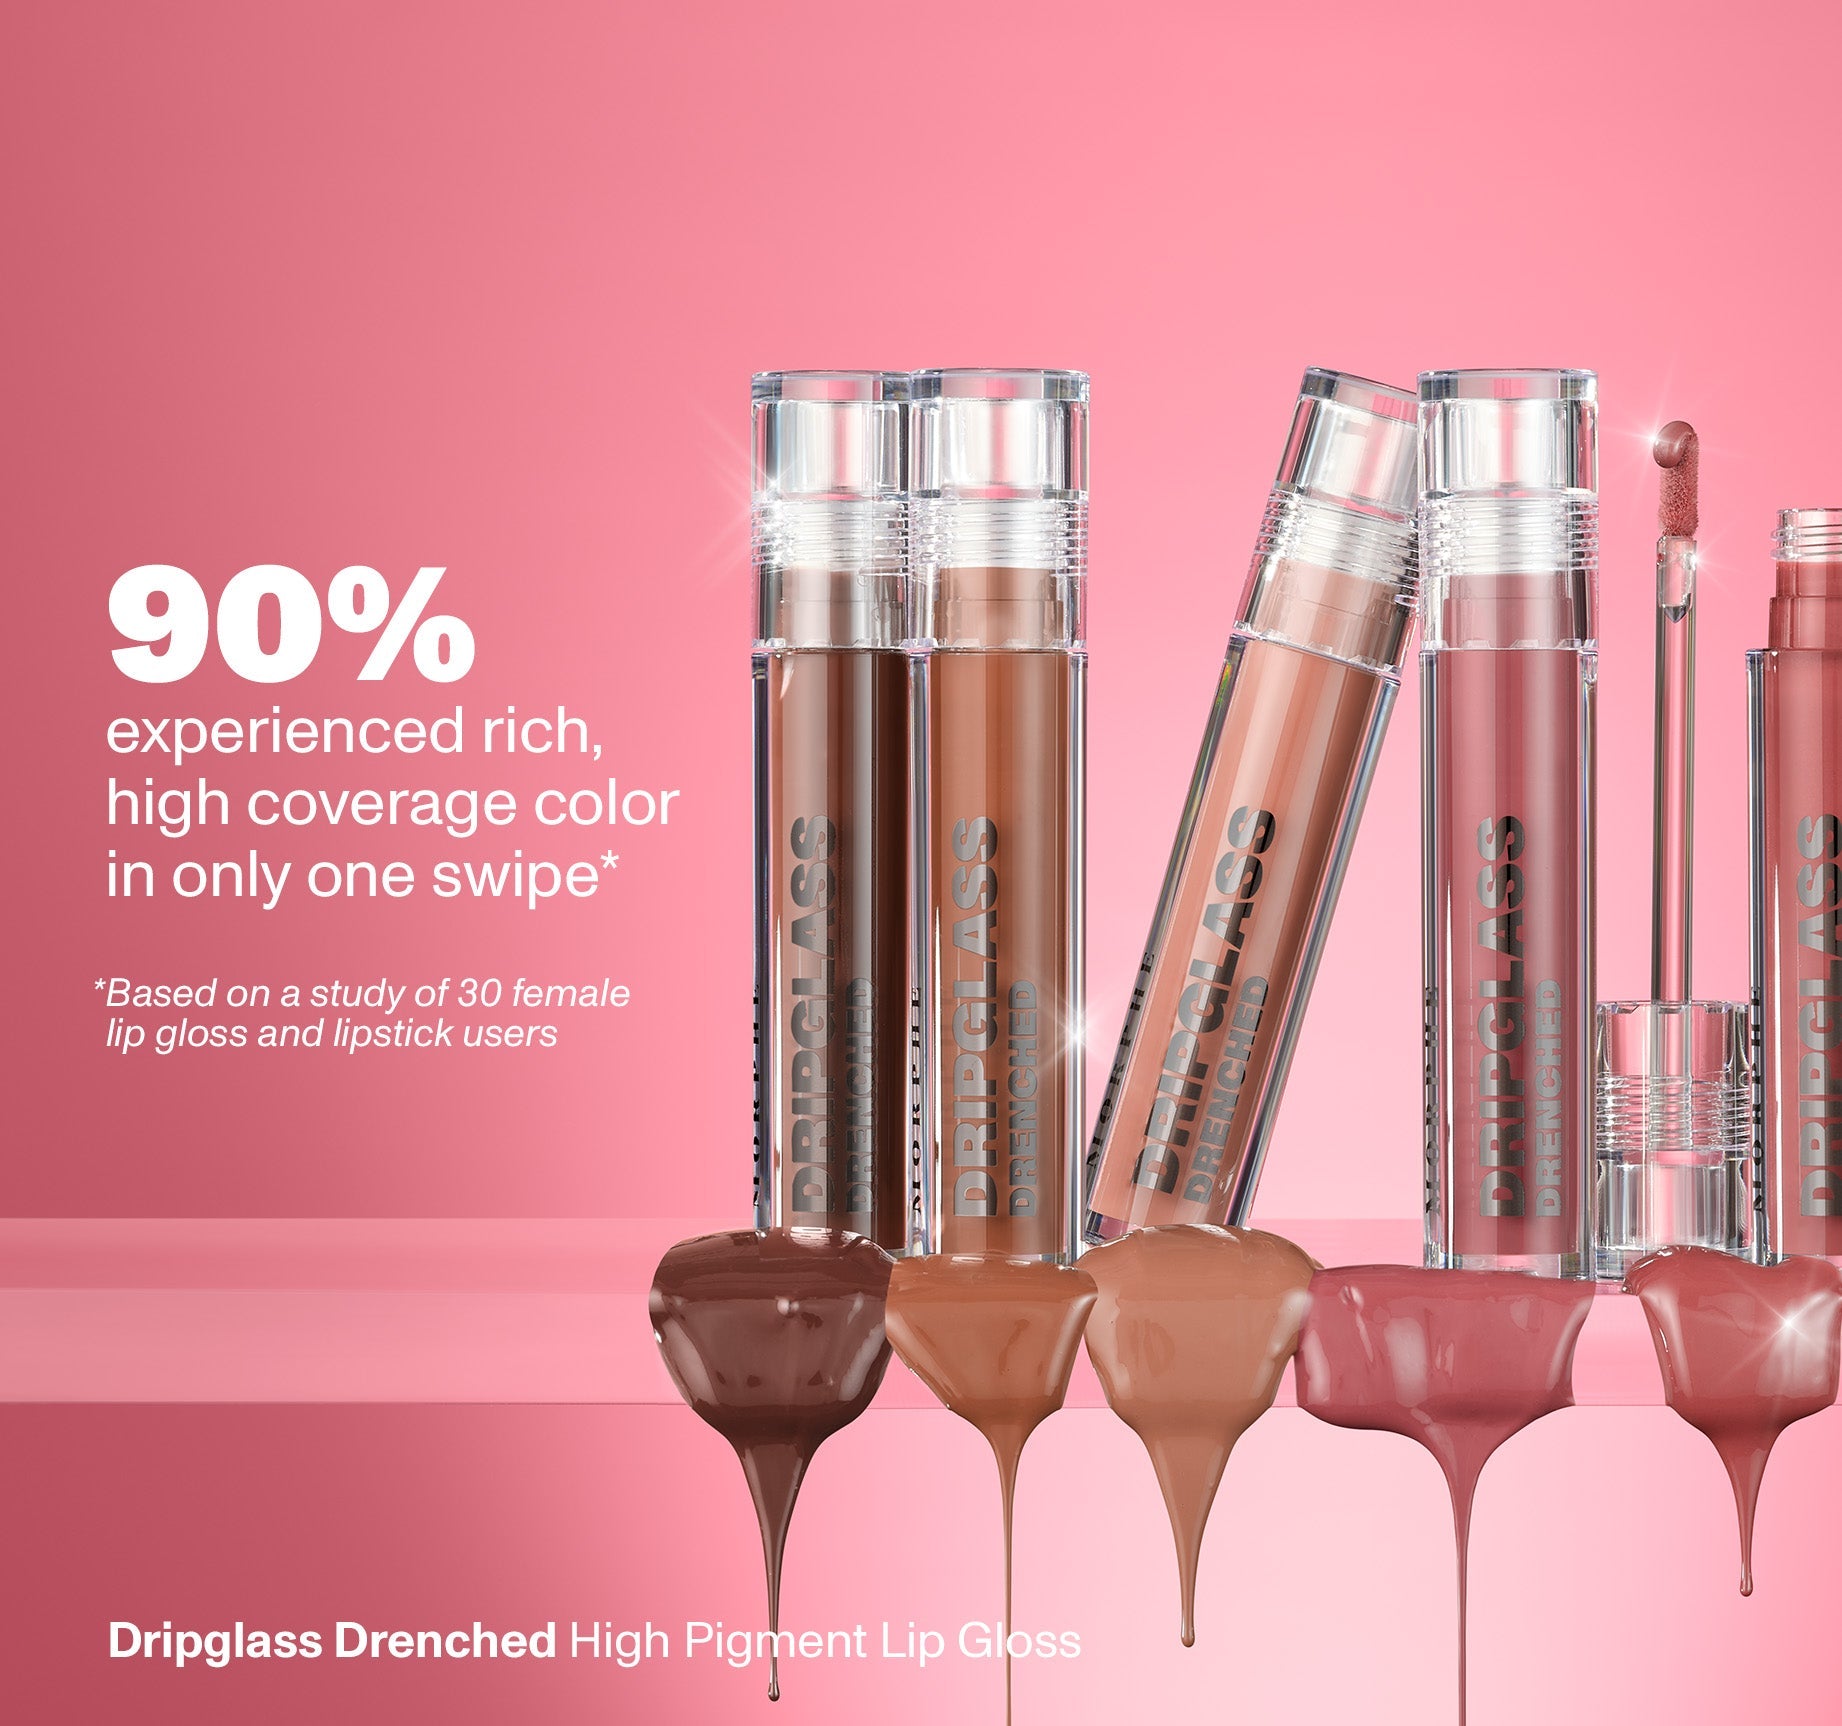 Dripglass Drenched High Pigment Lip Gloss - Cocoa Melt - Image 8